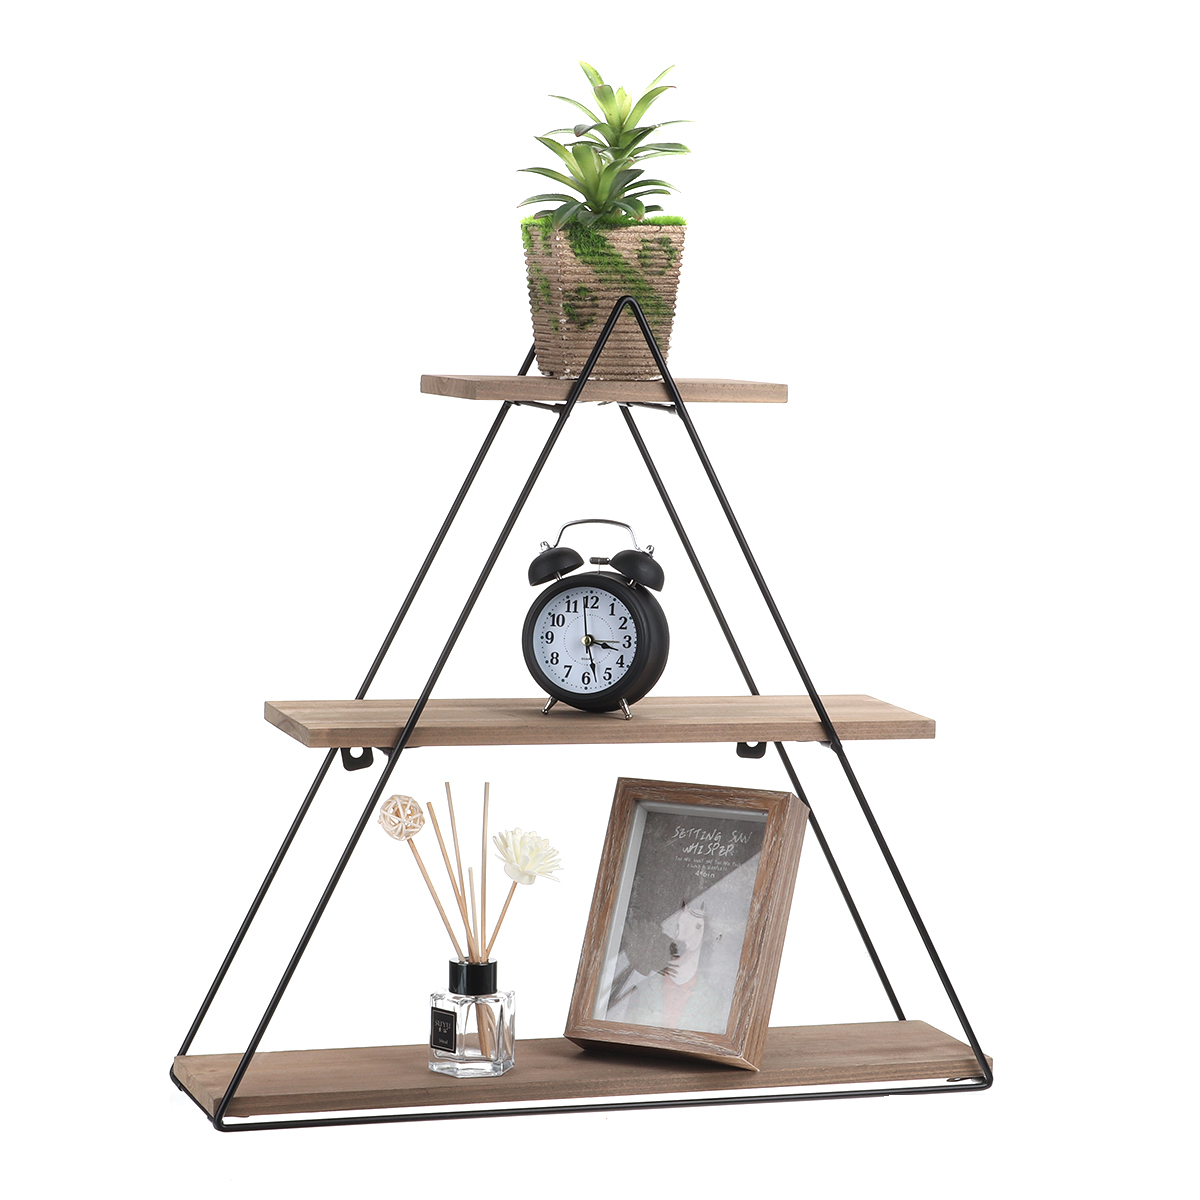 3-Tier Triangular Wall Mounted Shelf Floating Shelves Metal Display Rack Home Hanging Stand Decor For Living Room Office Bedroom